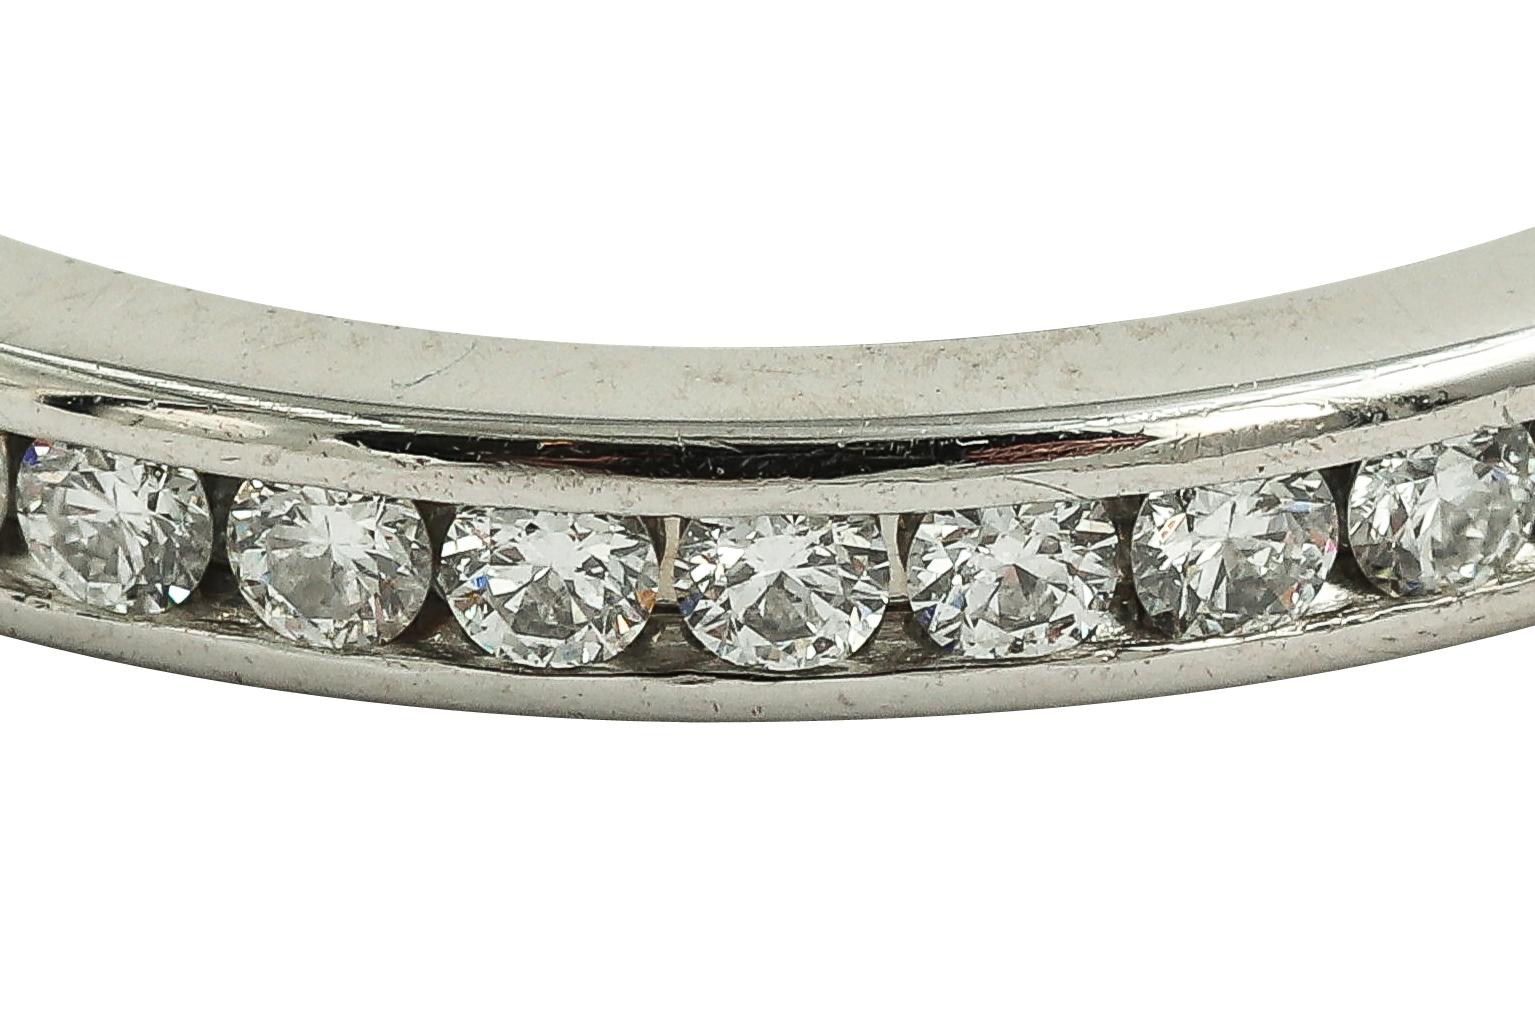 Circa 2000s, constructed from solid platinum, the ring has an array of round cut high quality natural diamonds set along the platinum band. The Diamonds are carefully selected with matching F color VSI quality diamonds. Signed Tiffany & Co. Pt950 on